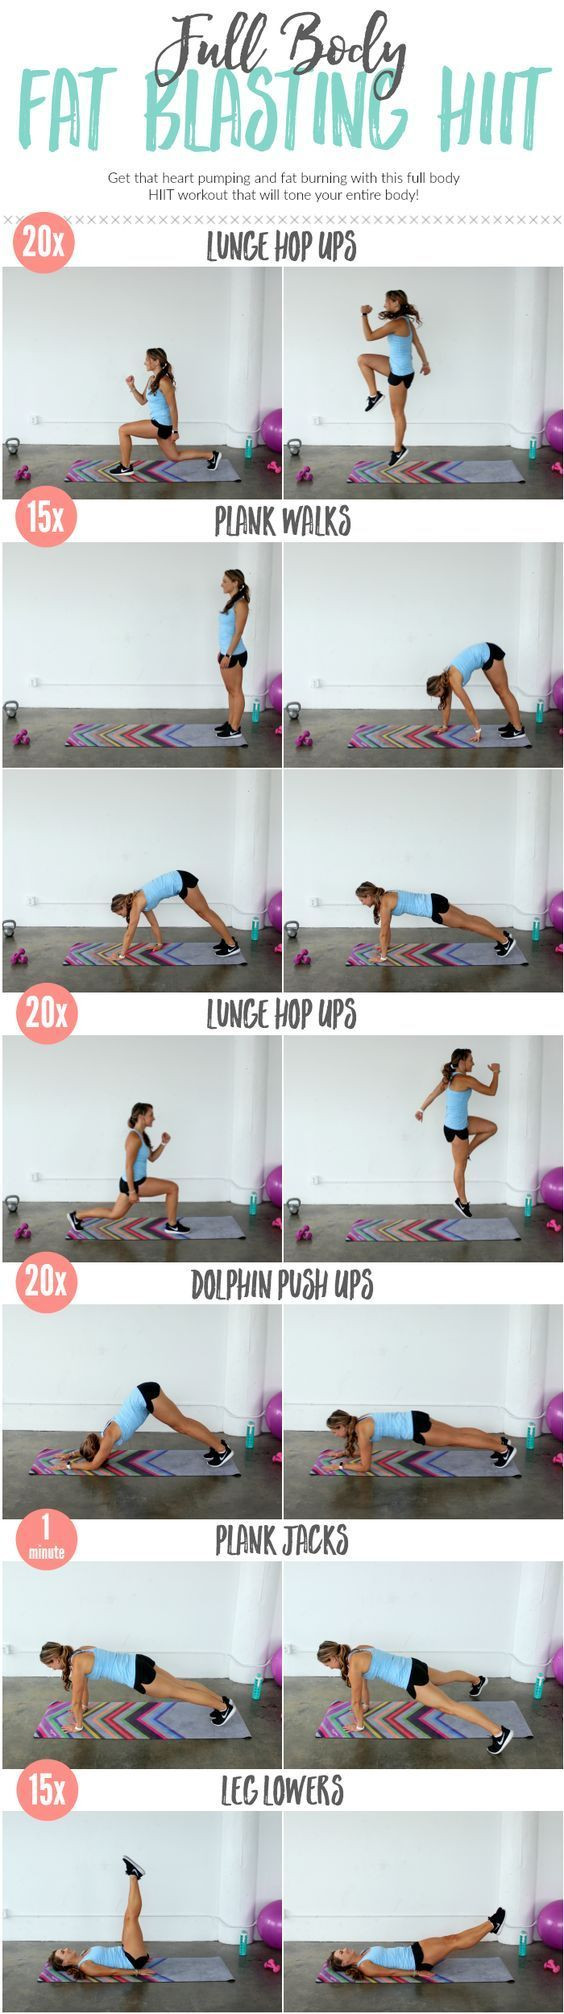 Weight Loss Exercises At Home Fat Burning
 51 Fat Burning Workouts That Fit Into ANY Busy Schedule